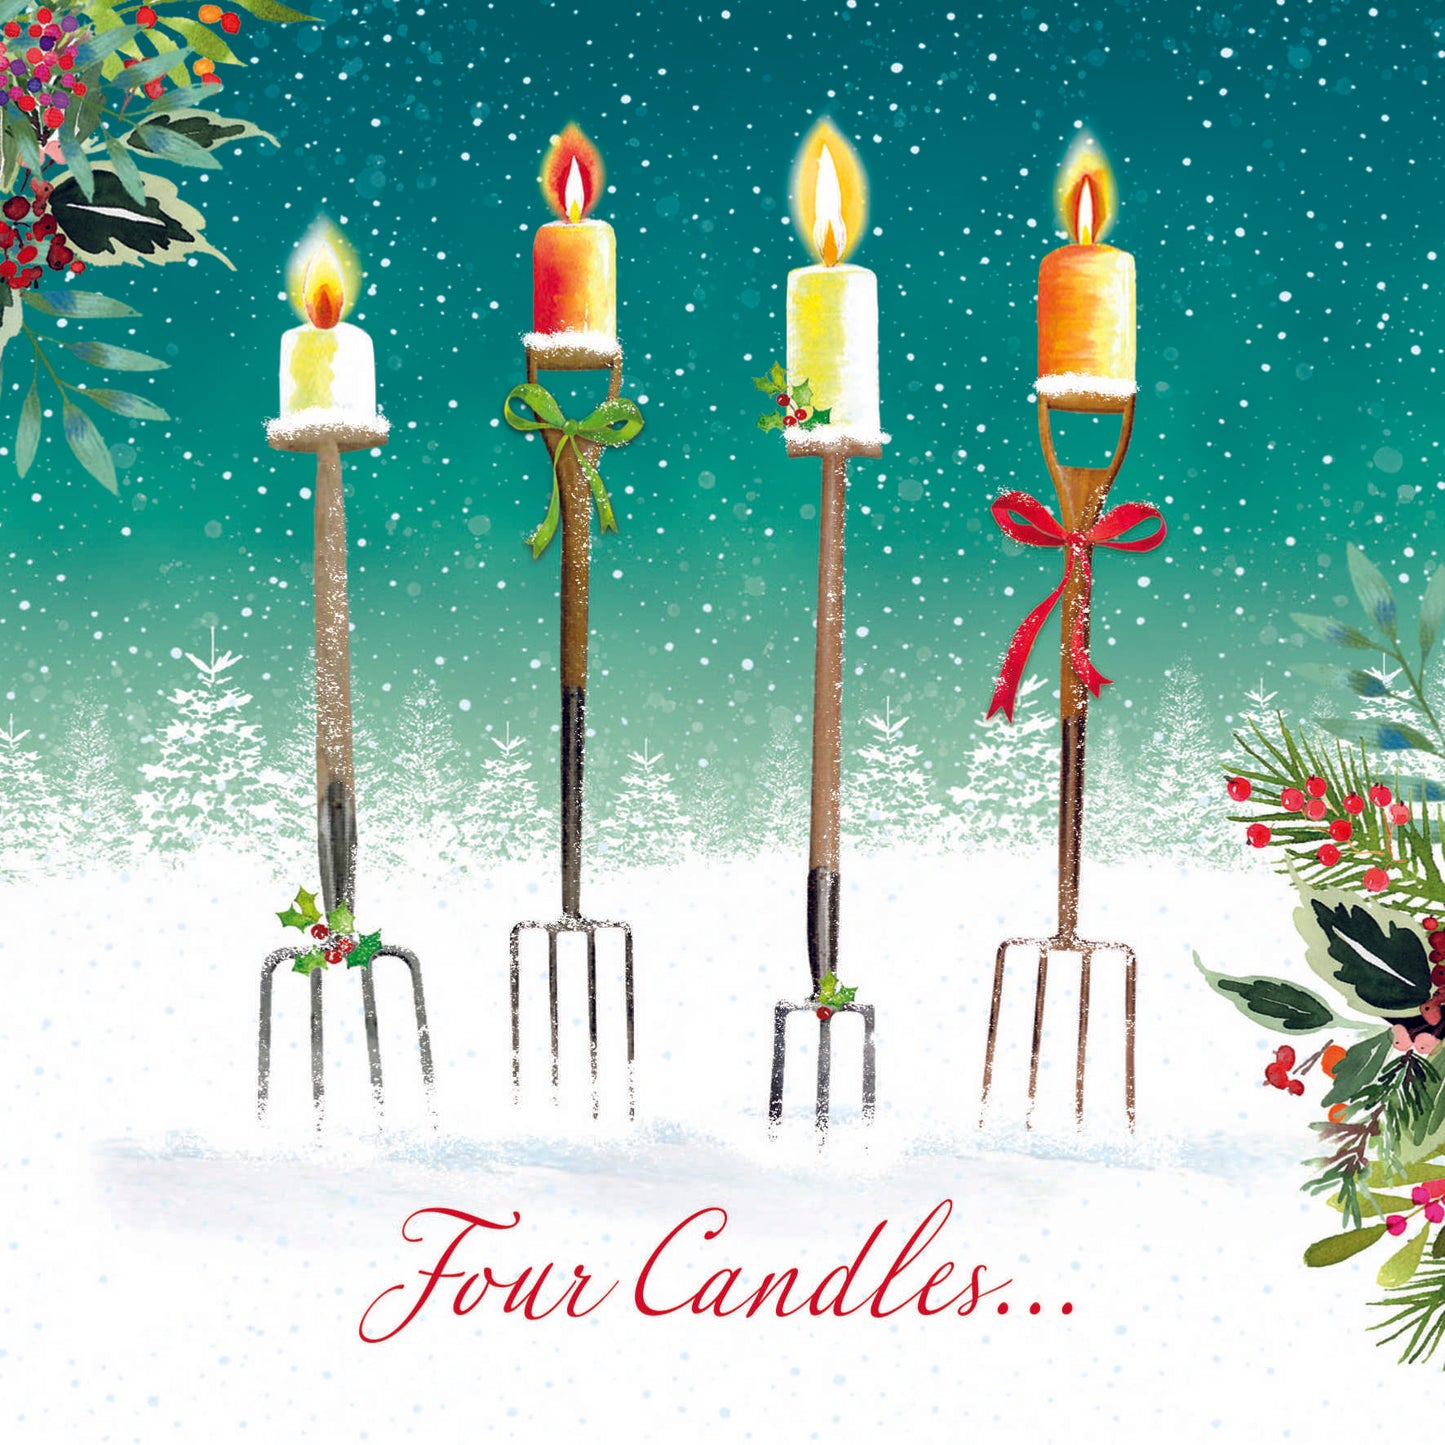 Four Candles - Christmas Card (10 pack)